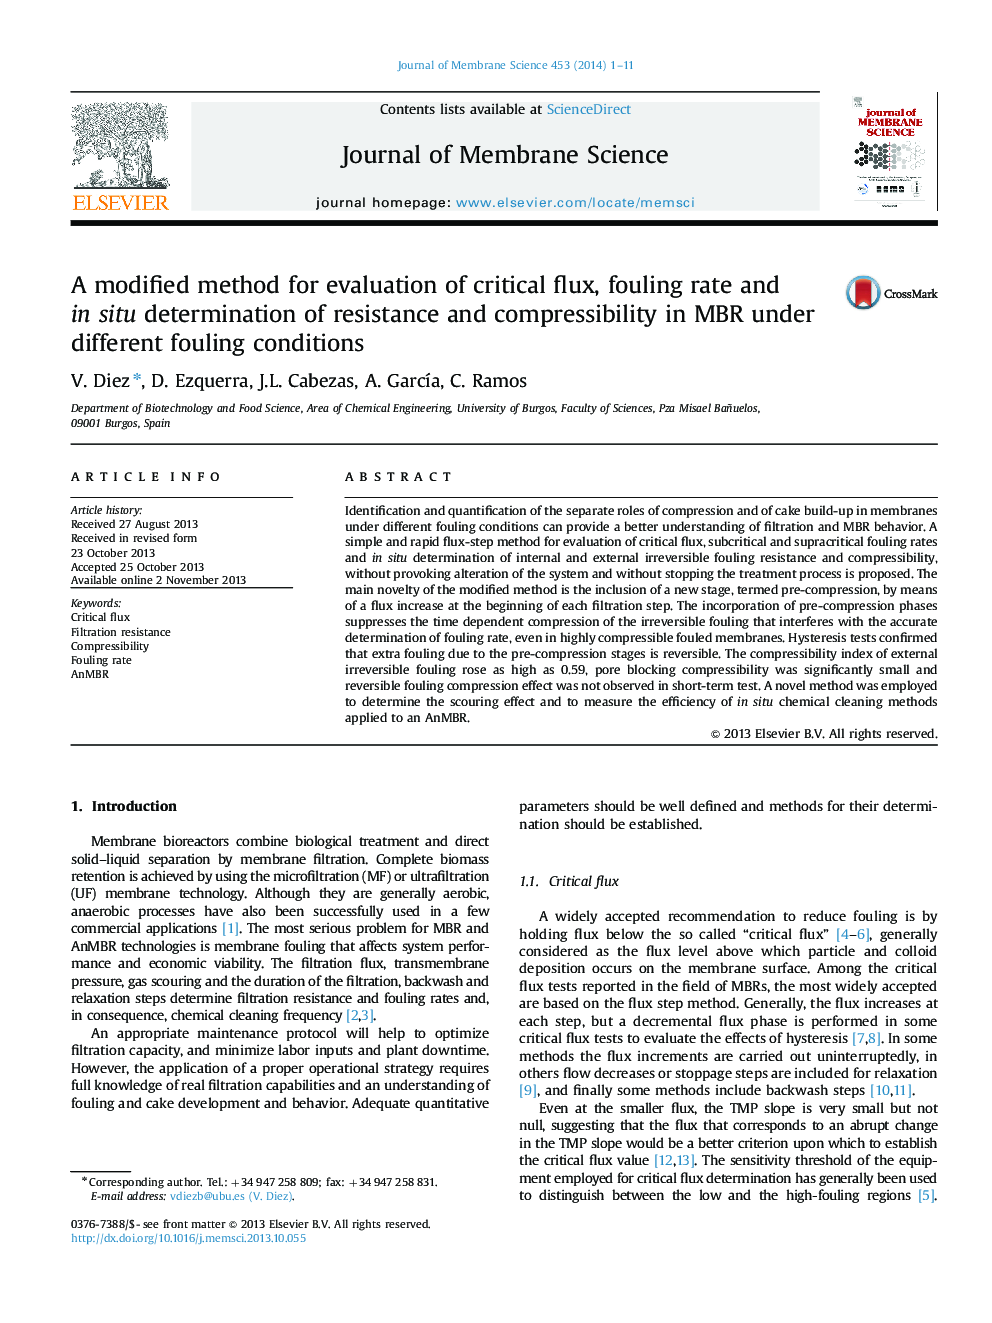 A modified method for evaluation of critical flux, fouling rate and in situ determination of resistance and compressibility in MBR under different fouling conditions